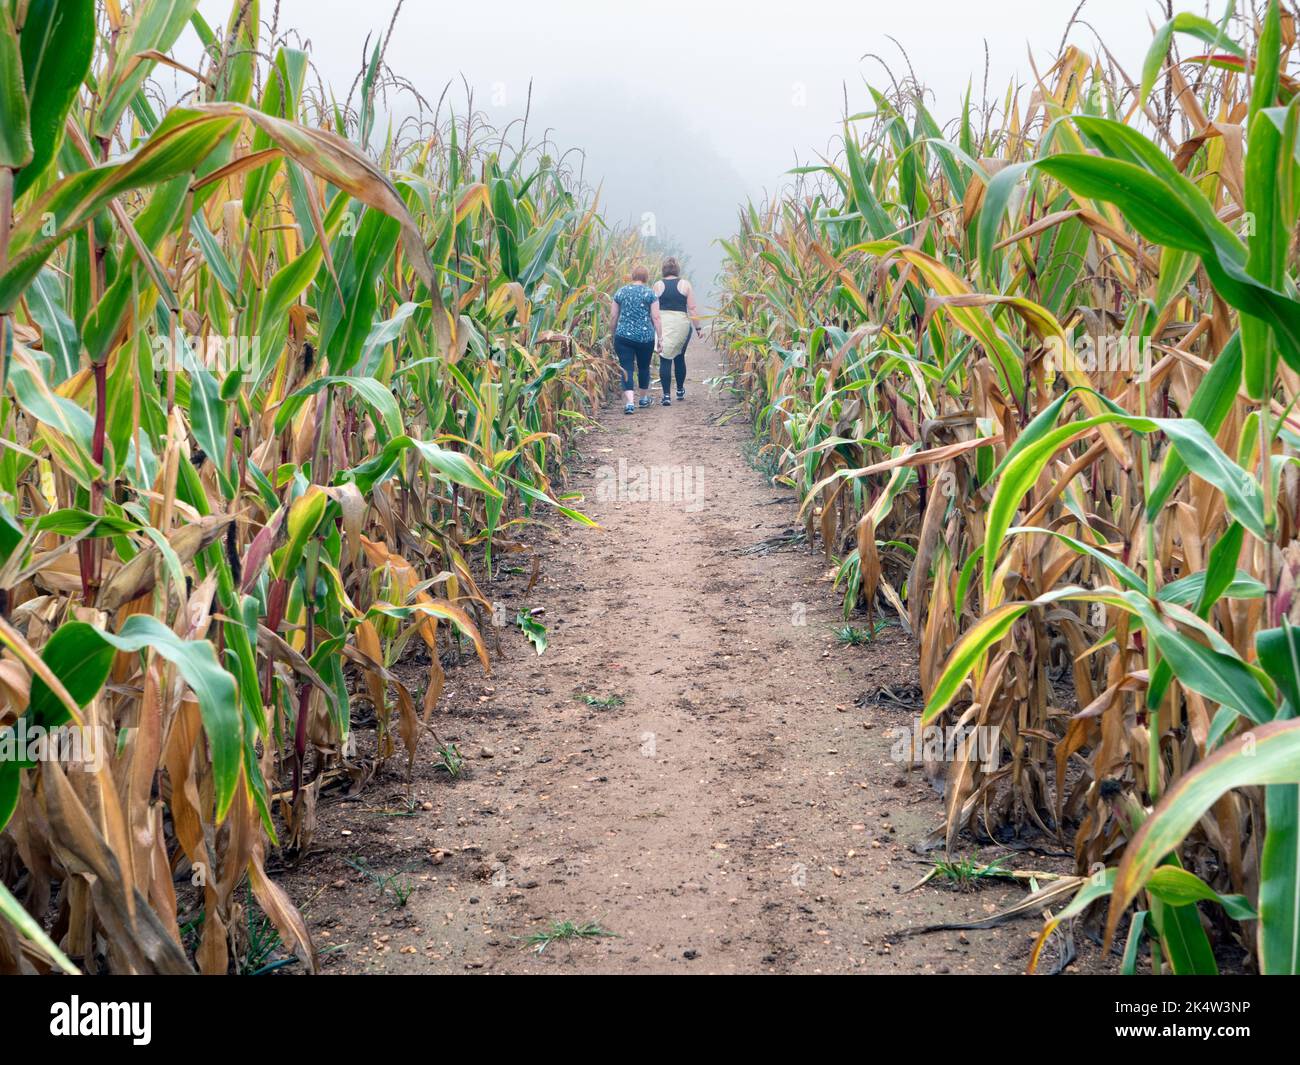 Maize in not a common crop in Oxfordshire. But here is a field of the nearly ripe staple crop by Radley Collage. A common-law footpath splits the fiel Stock Photo